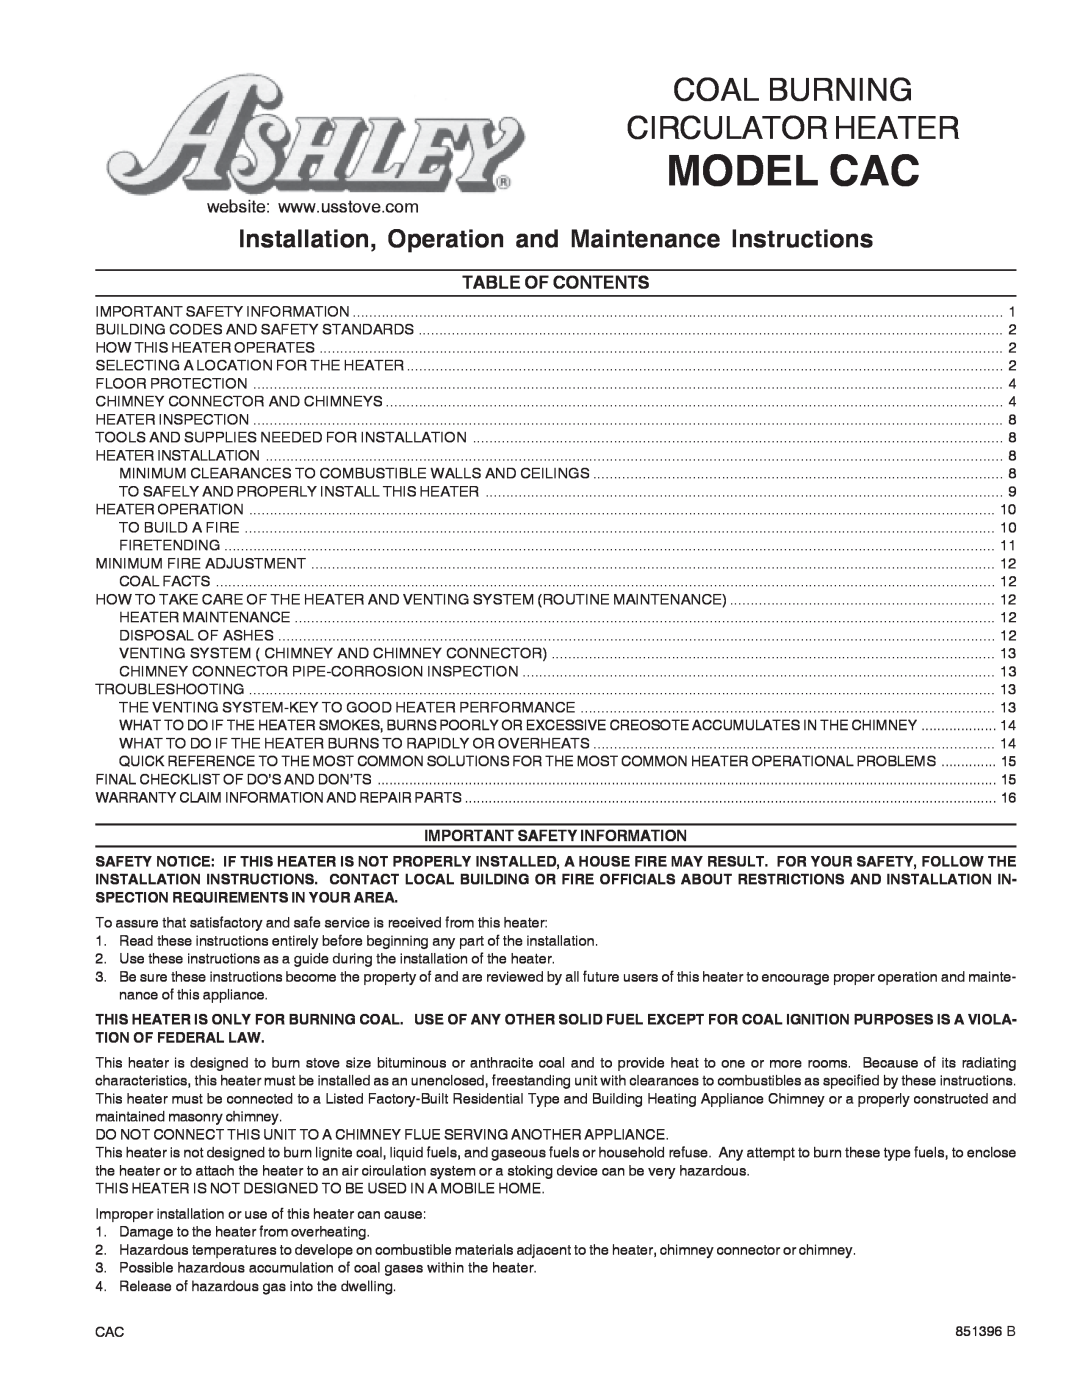 United States Stove DR6 warranty Table Of Contents, Model Cac, Coal Burning, Circulator Heater 